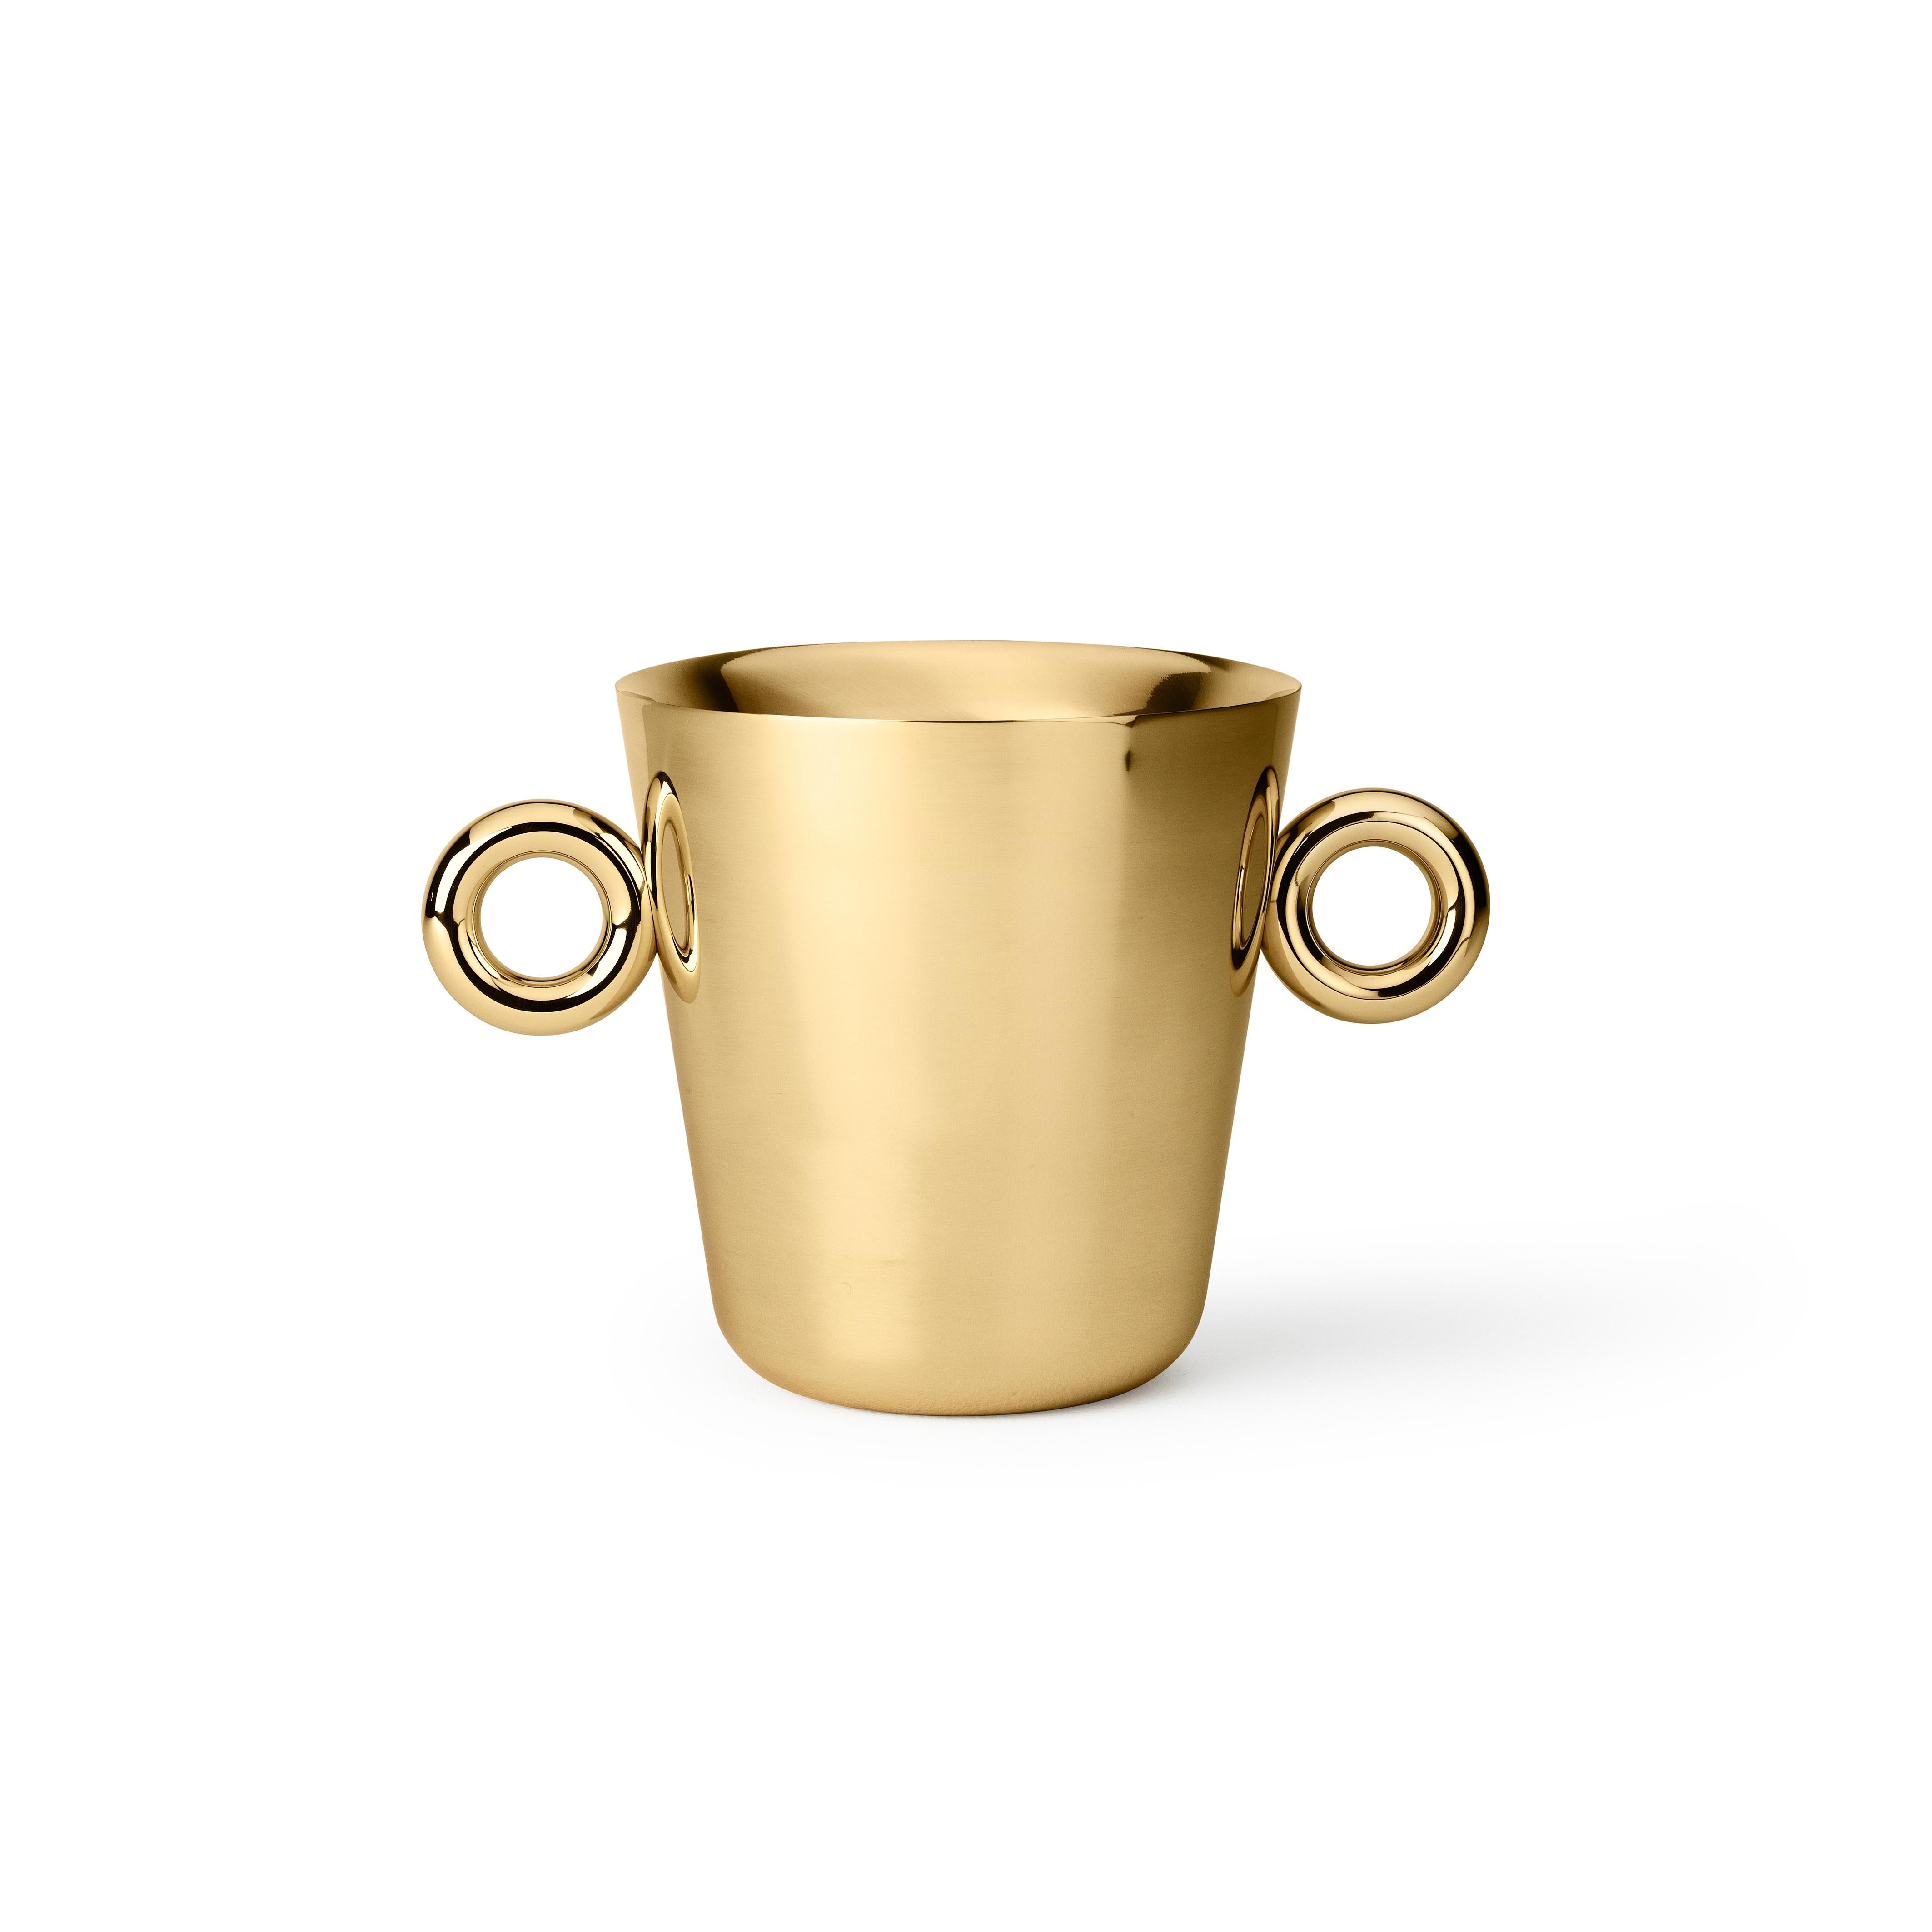 Ice bucket in brass
For the double O champagne cooler Hutten used his iconic loop shape. The O shaped handle give a playful but chique touch to the cooler. James will love it.

Material:
Stainless steel with pvd treatment and handles in